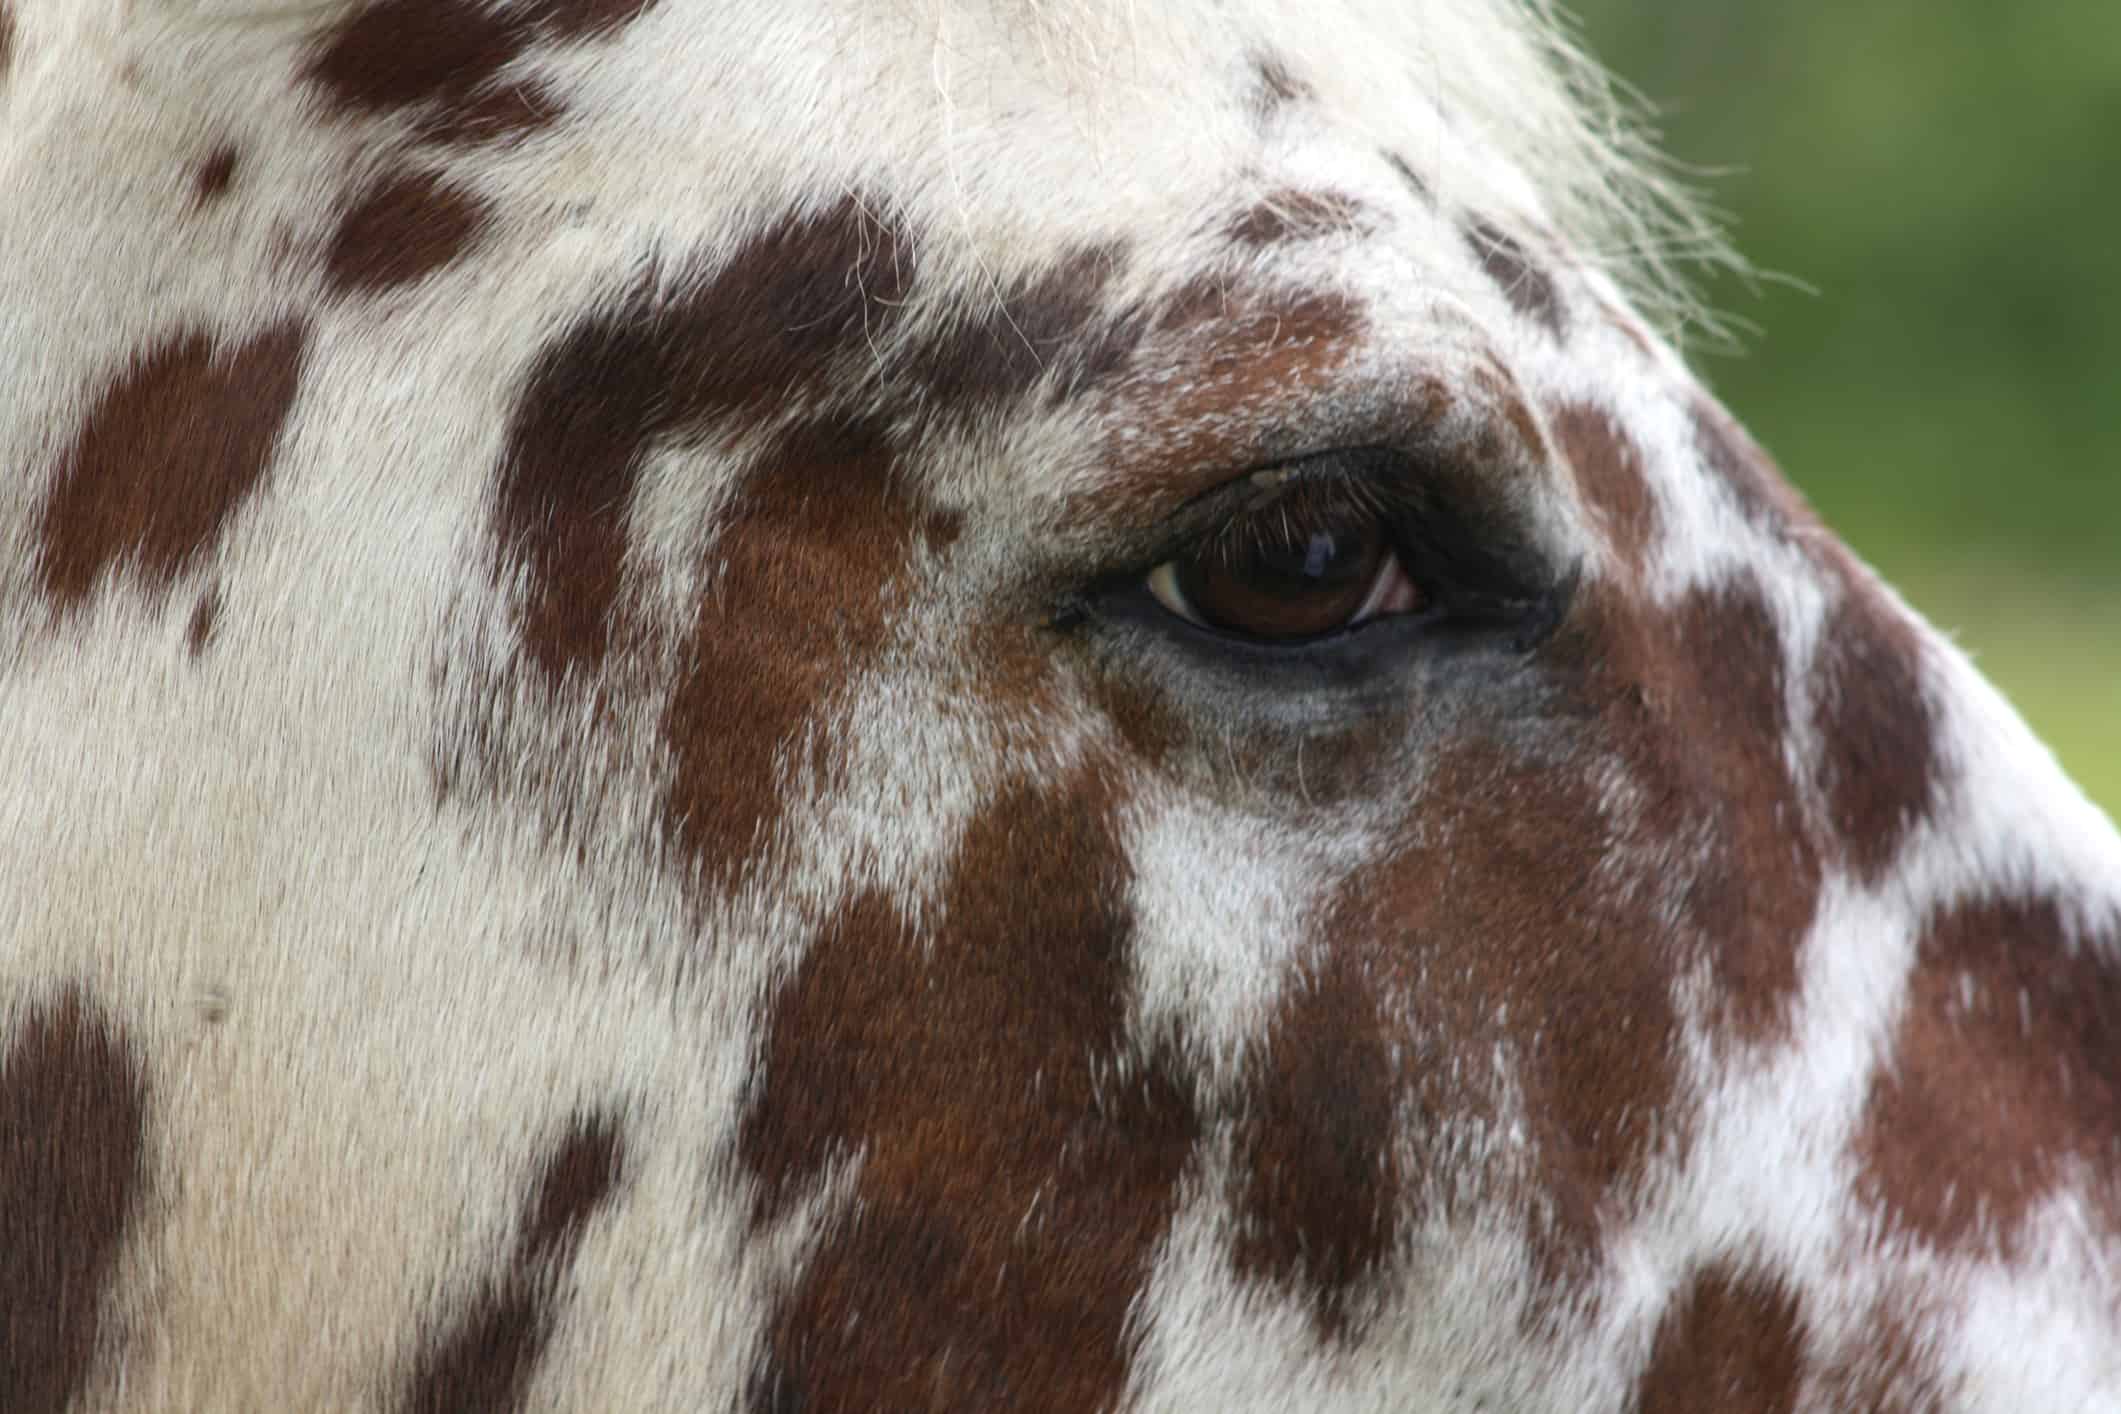 Tigered horse in close up